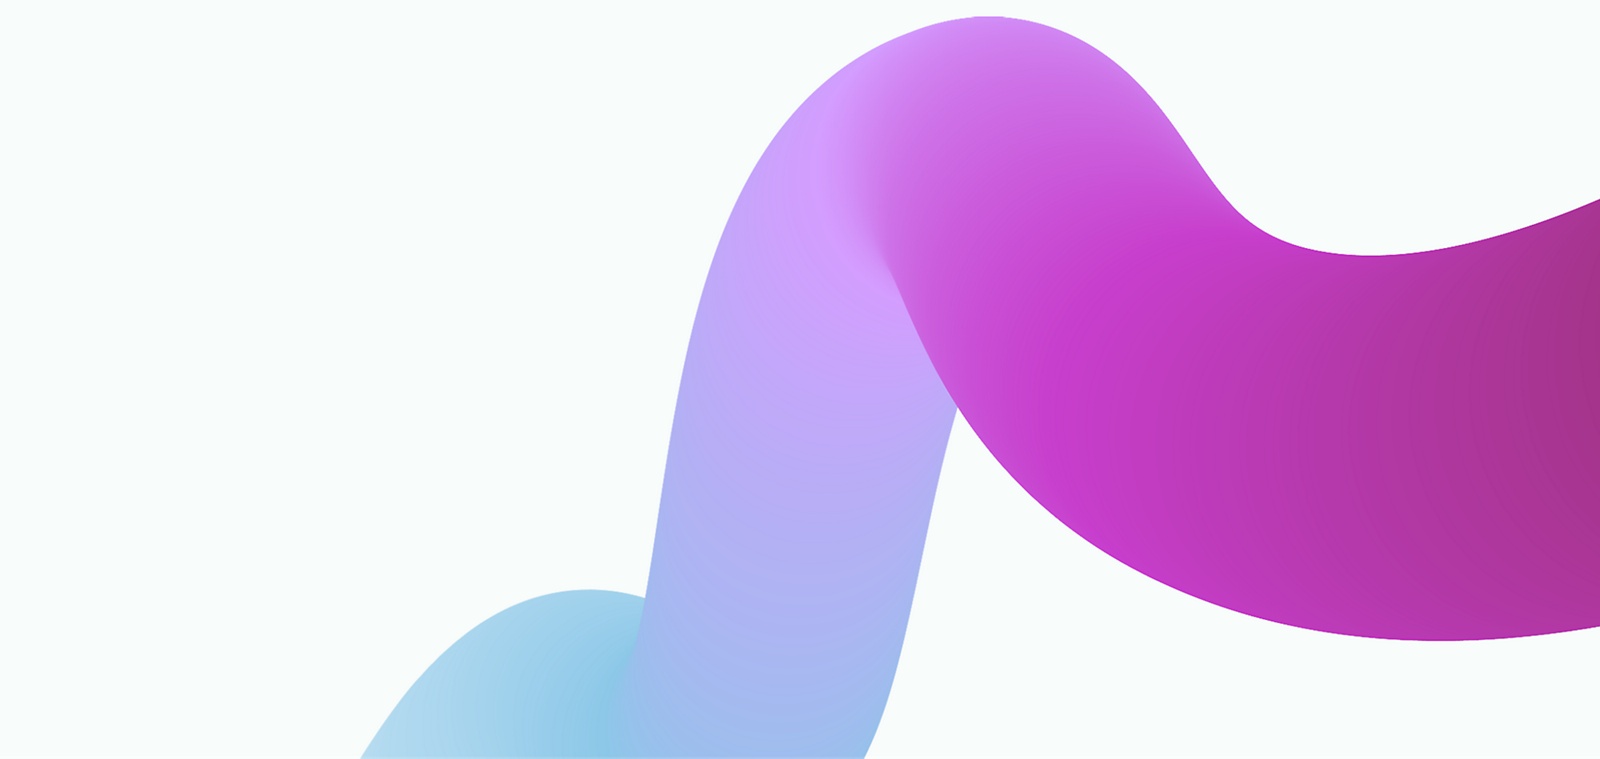 Abstract image featuring a smooth, flowing ribbon with a gradient transition from blue at one end to purple at the other 